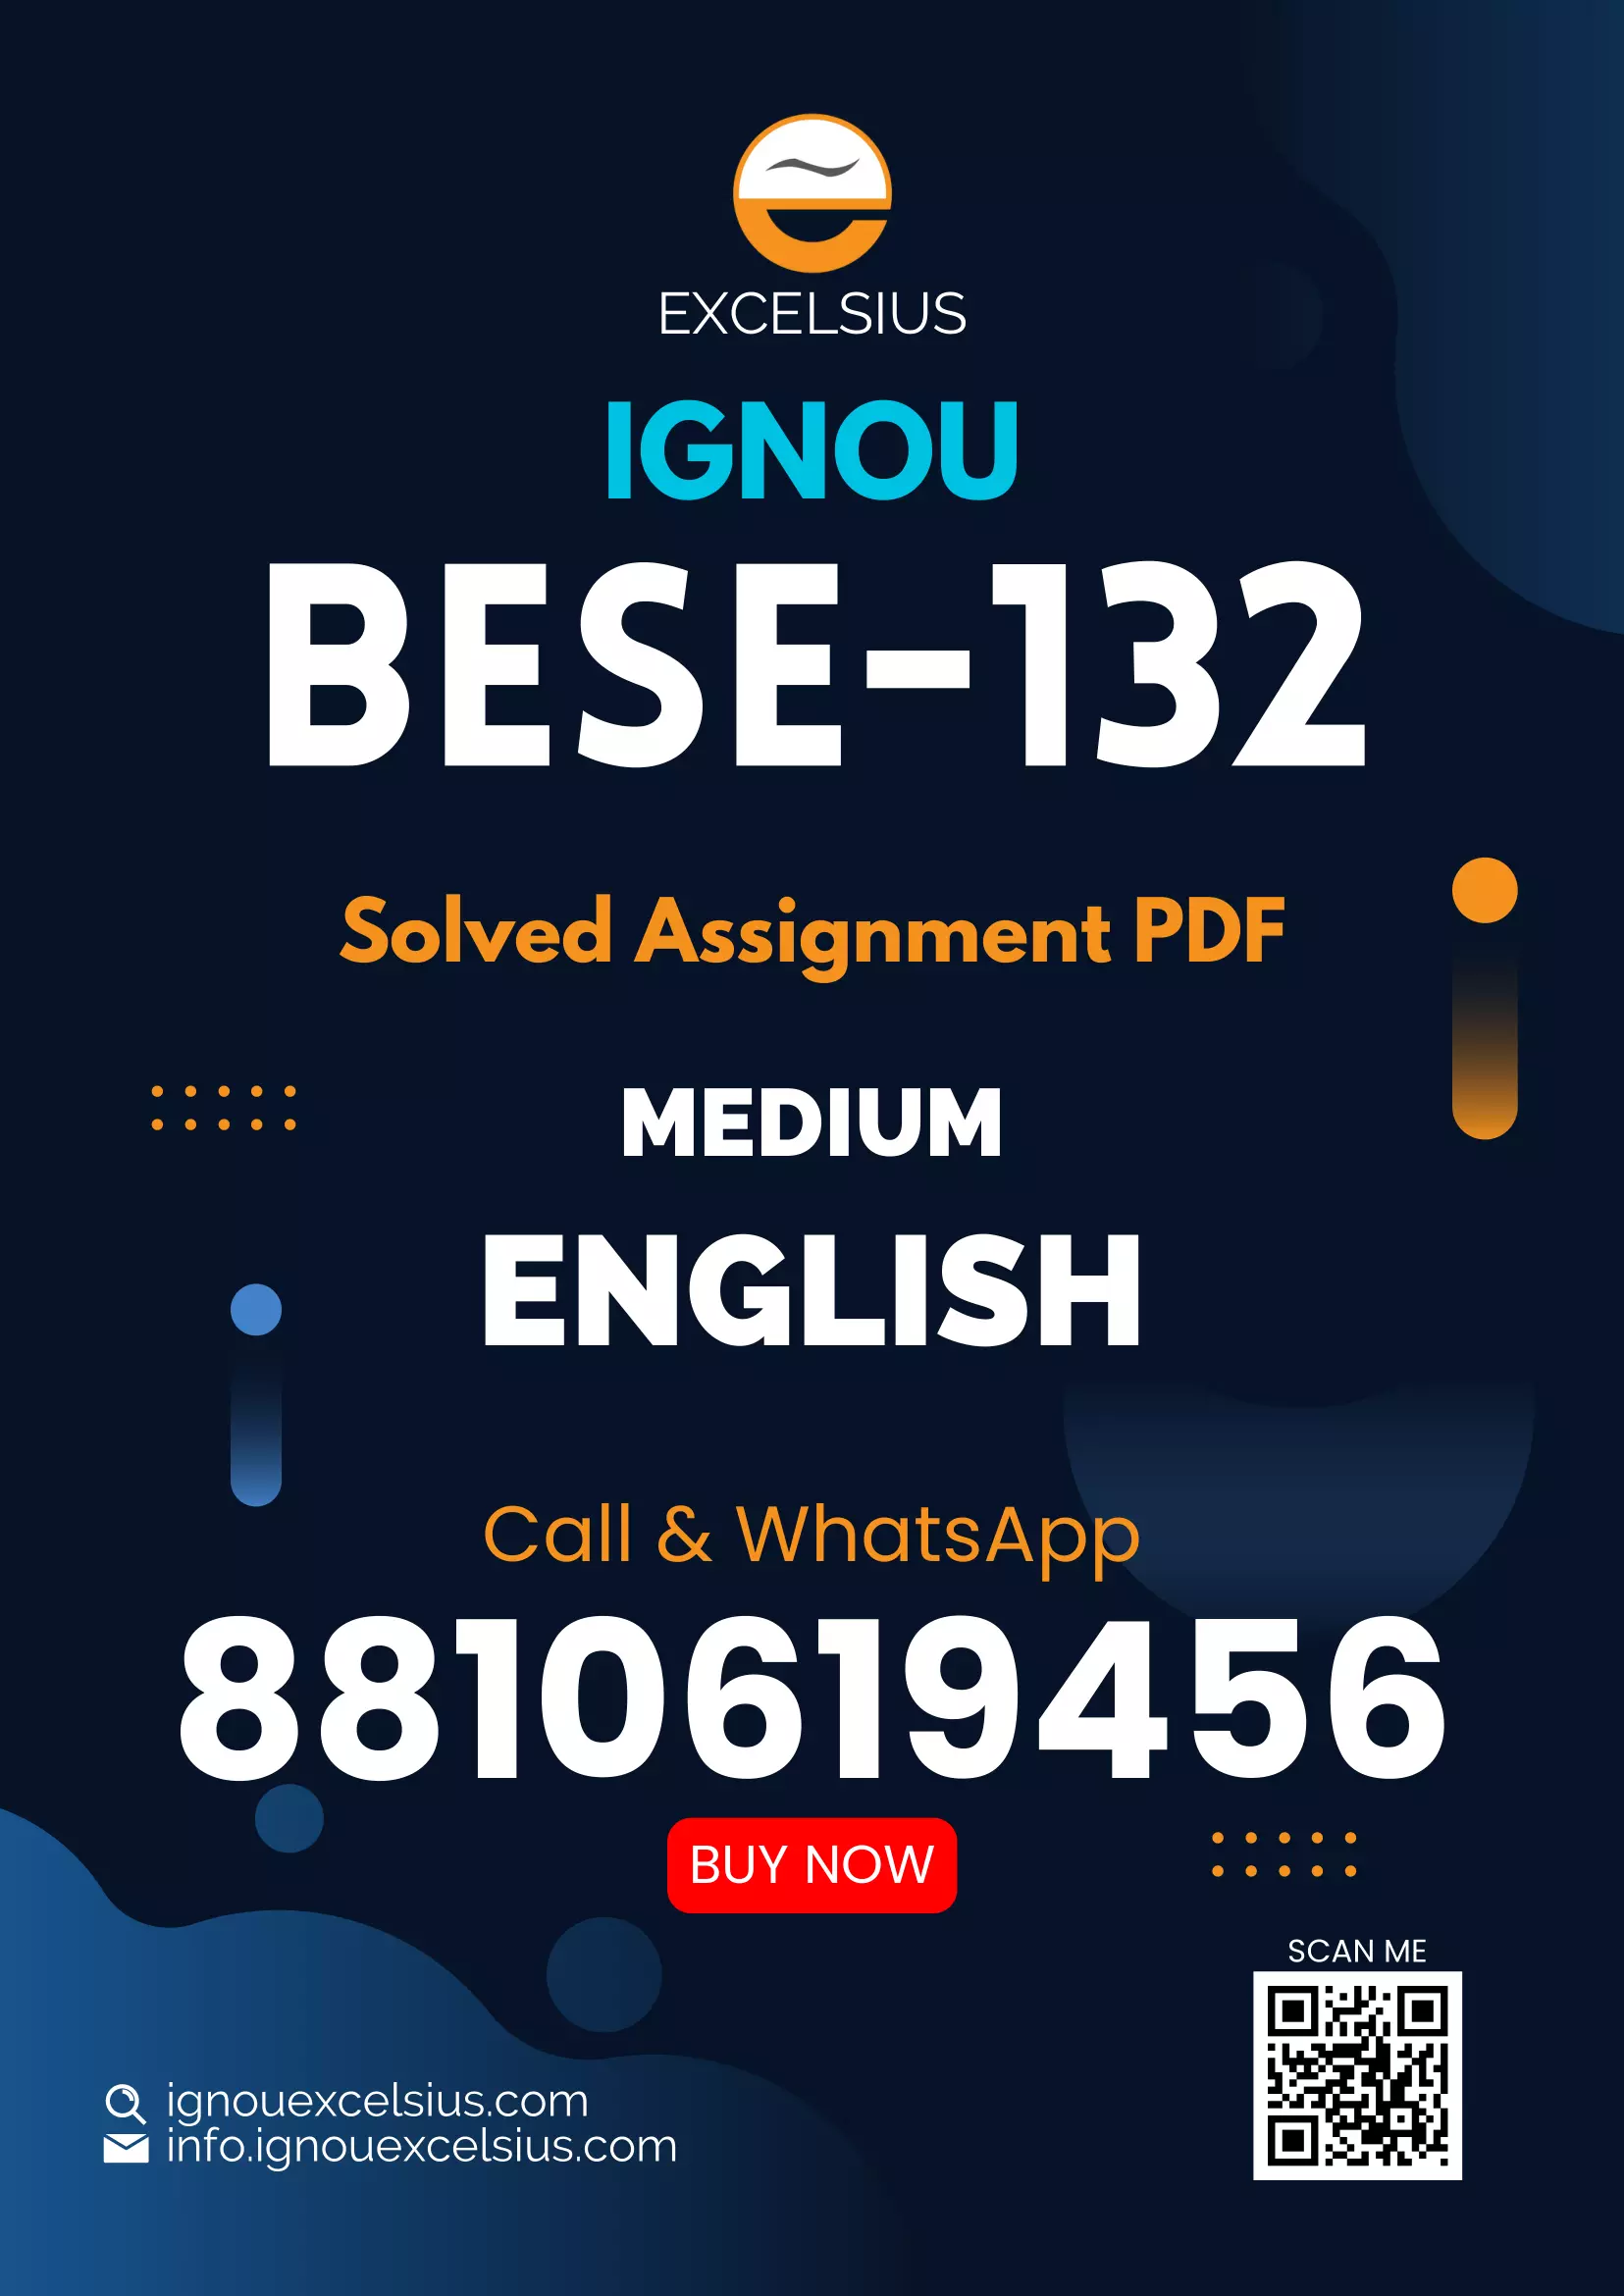 IGNOU BESE-132 - Guidance and Counselling, Latest Solved Assignment -July 2021 – January 2022